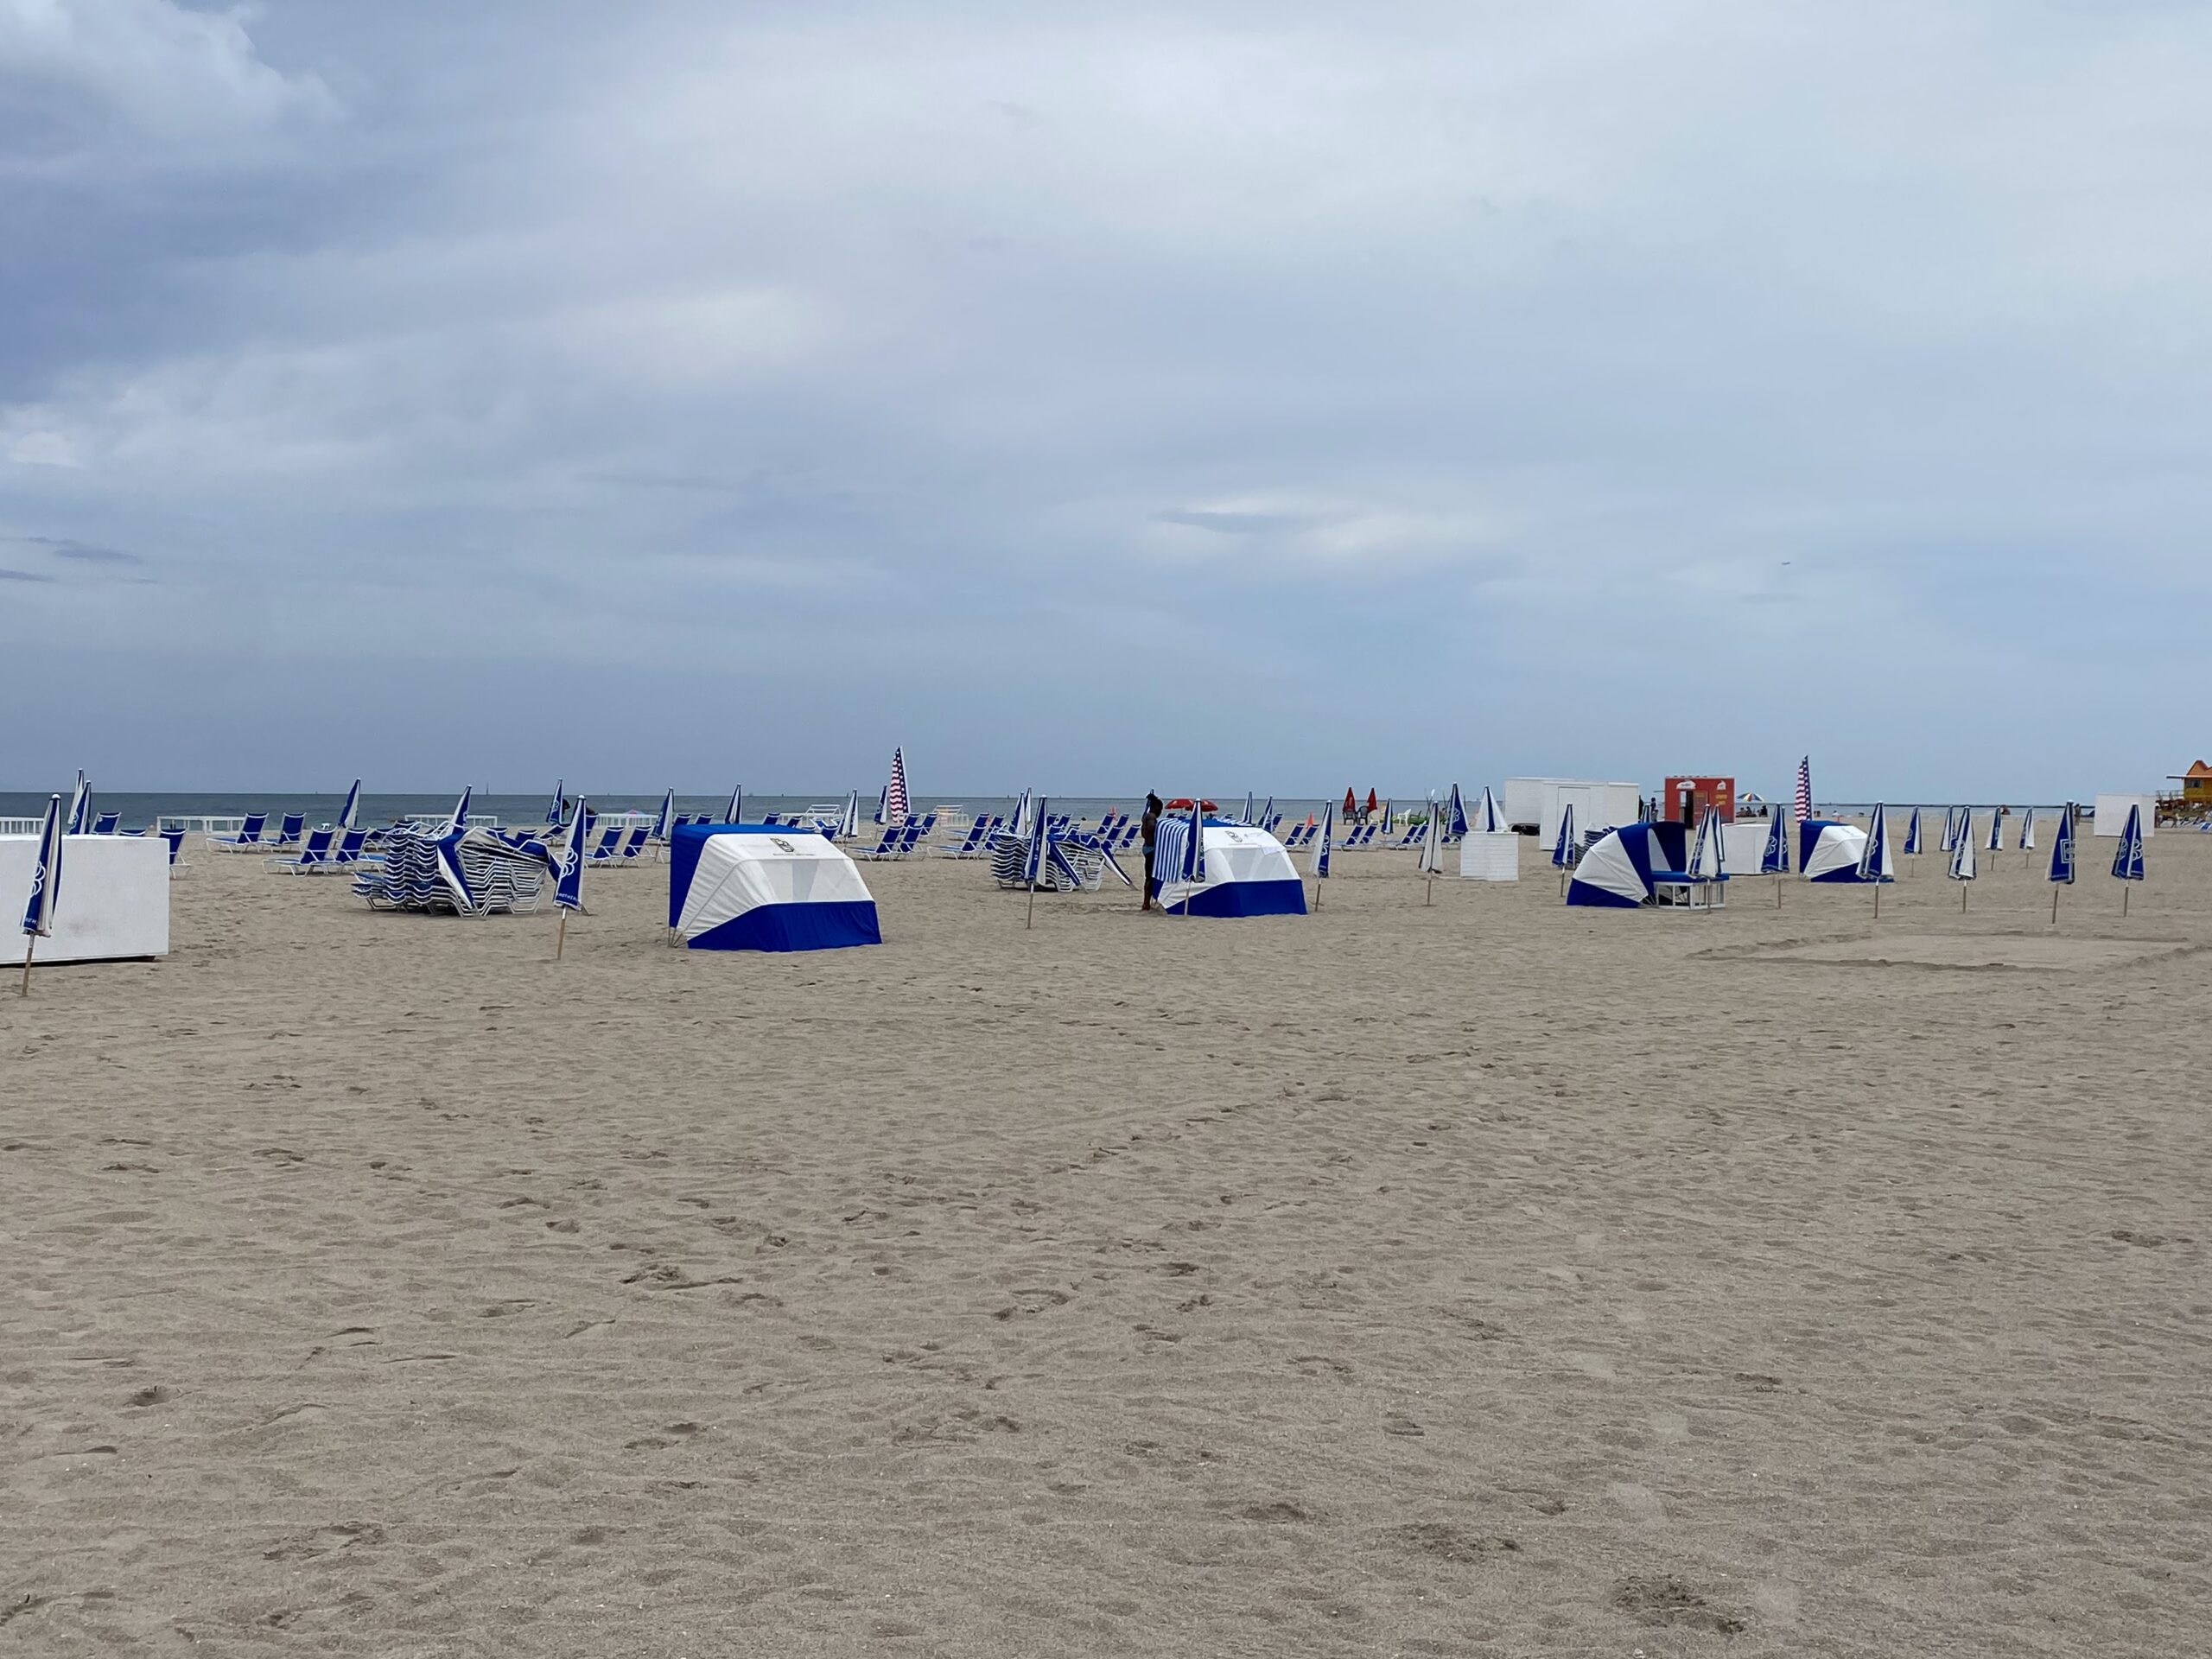 a beach with many tents and umbrellas